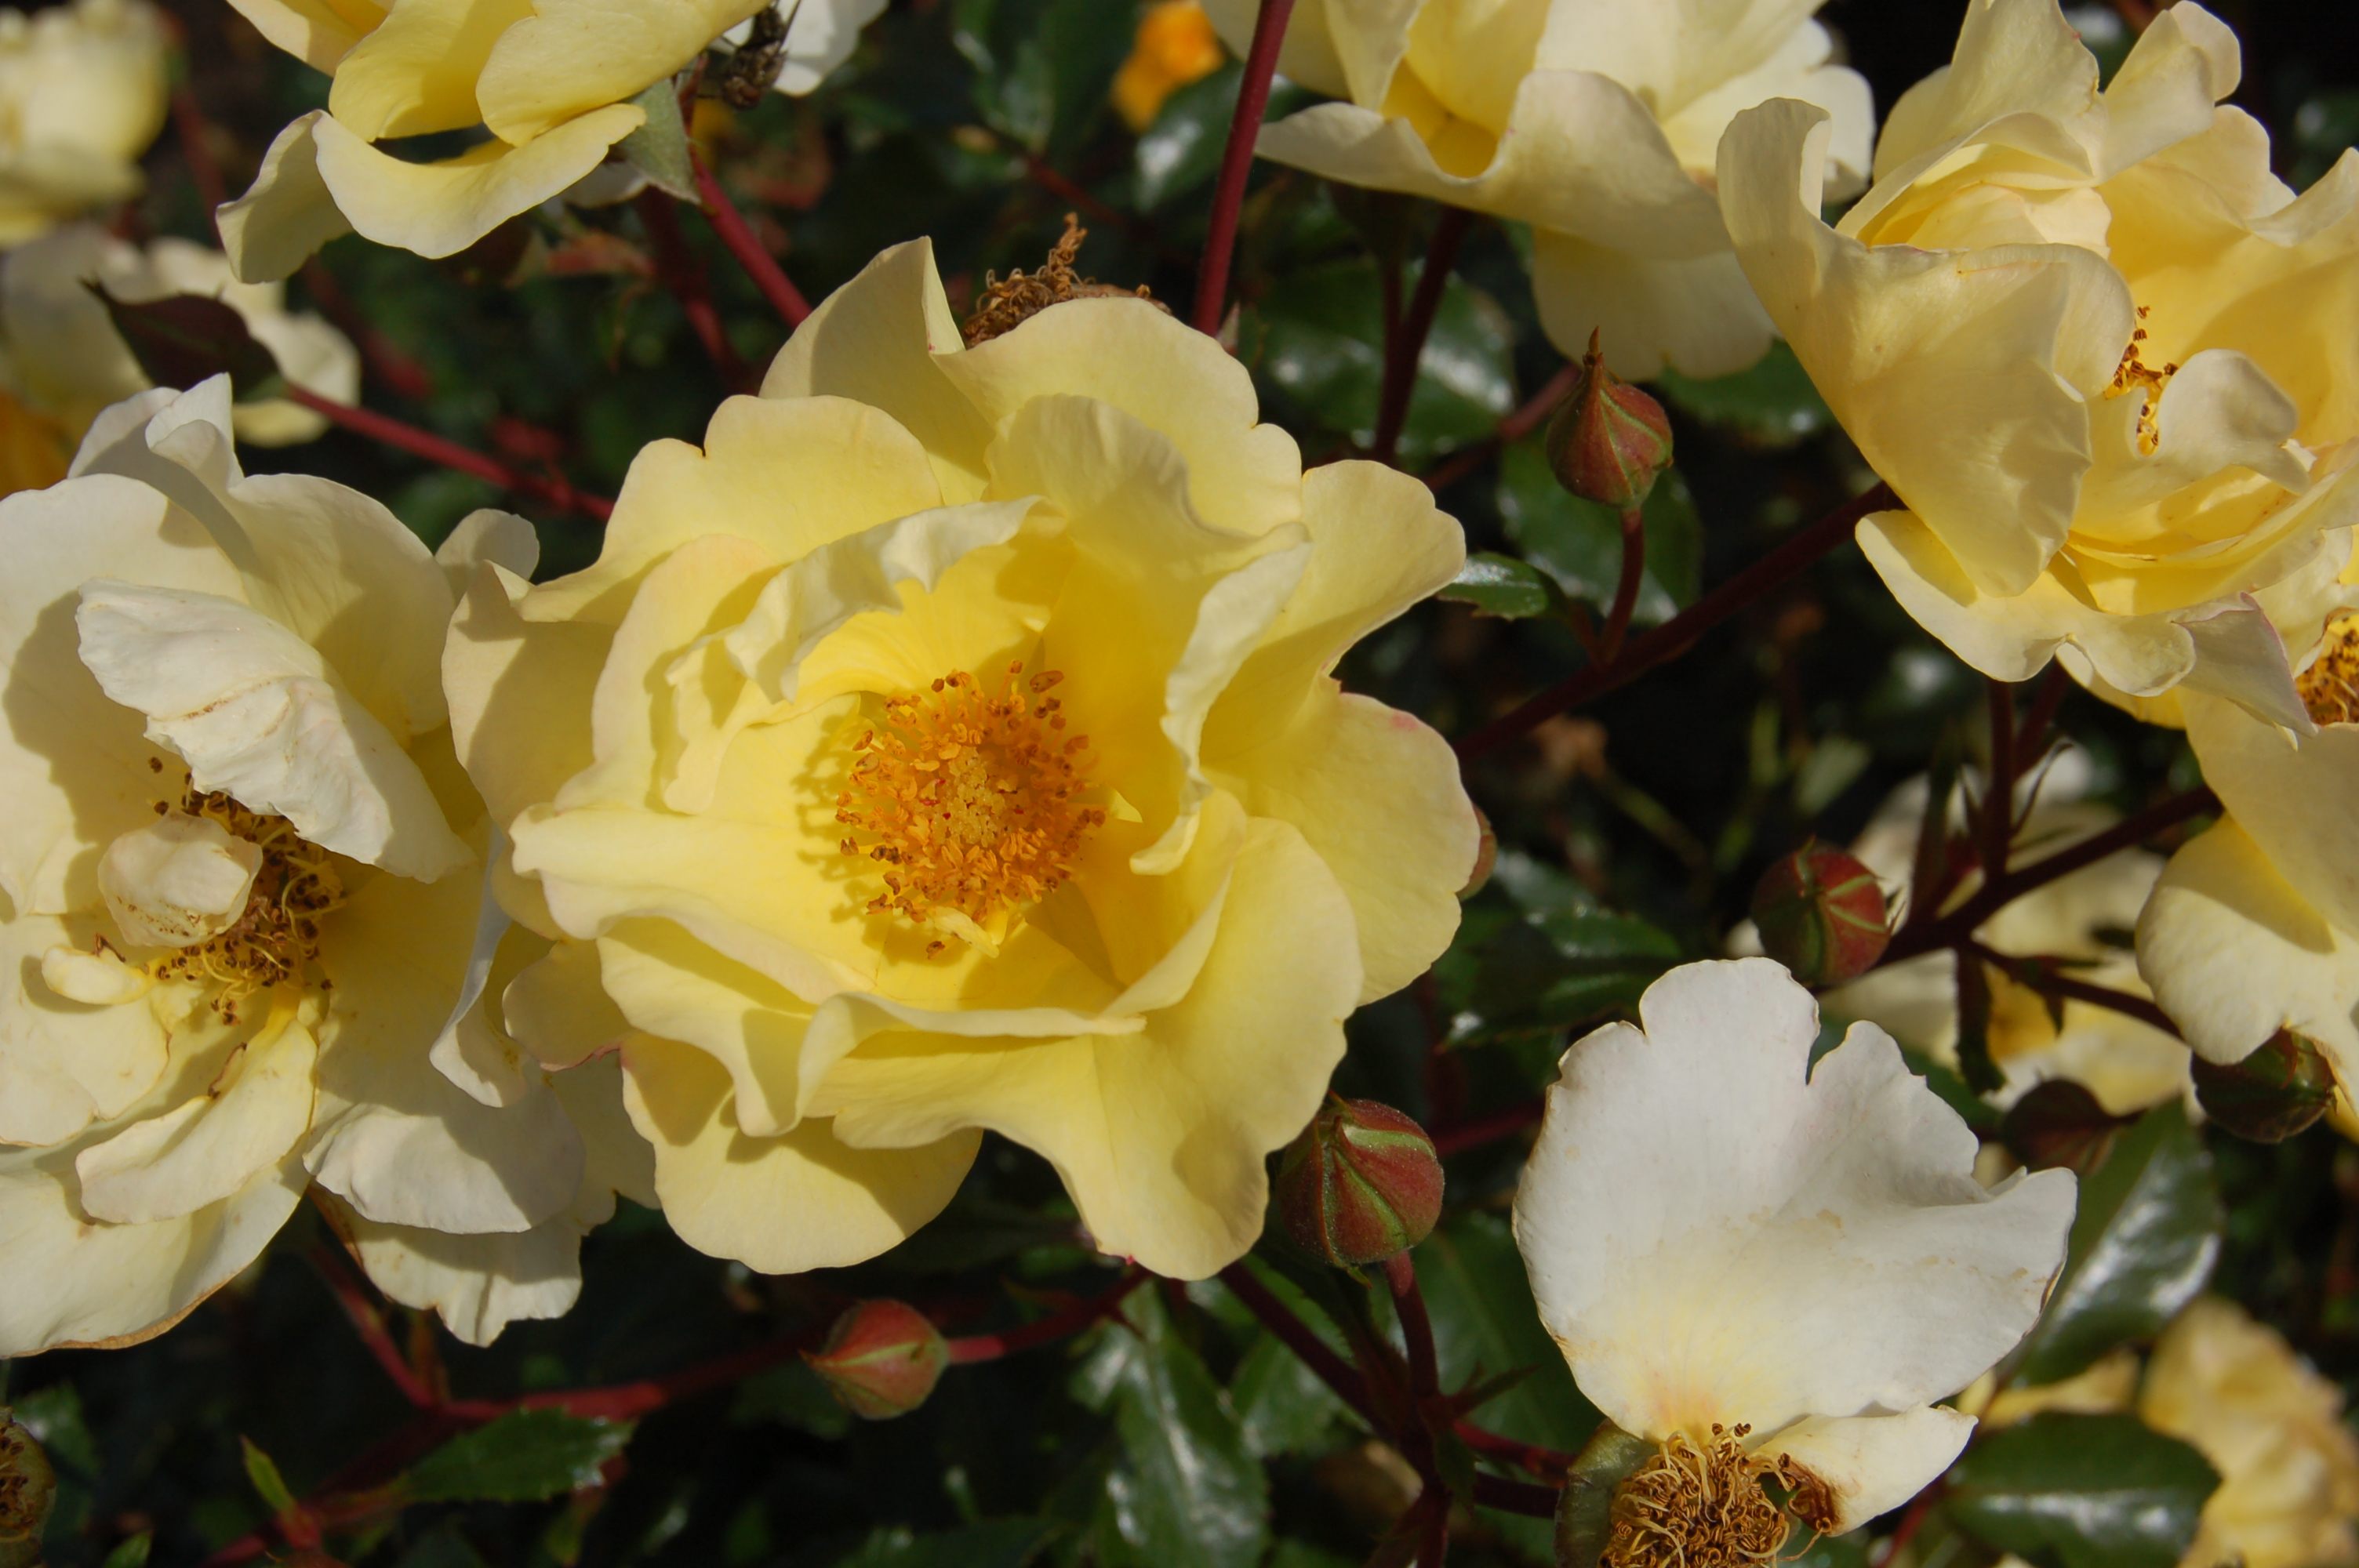 Rosa Nitty Gritty® Yellow